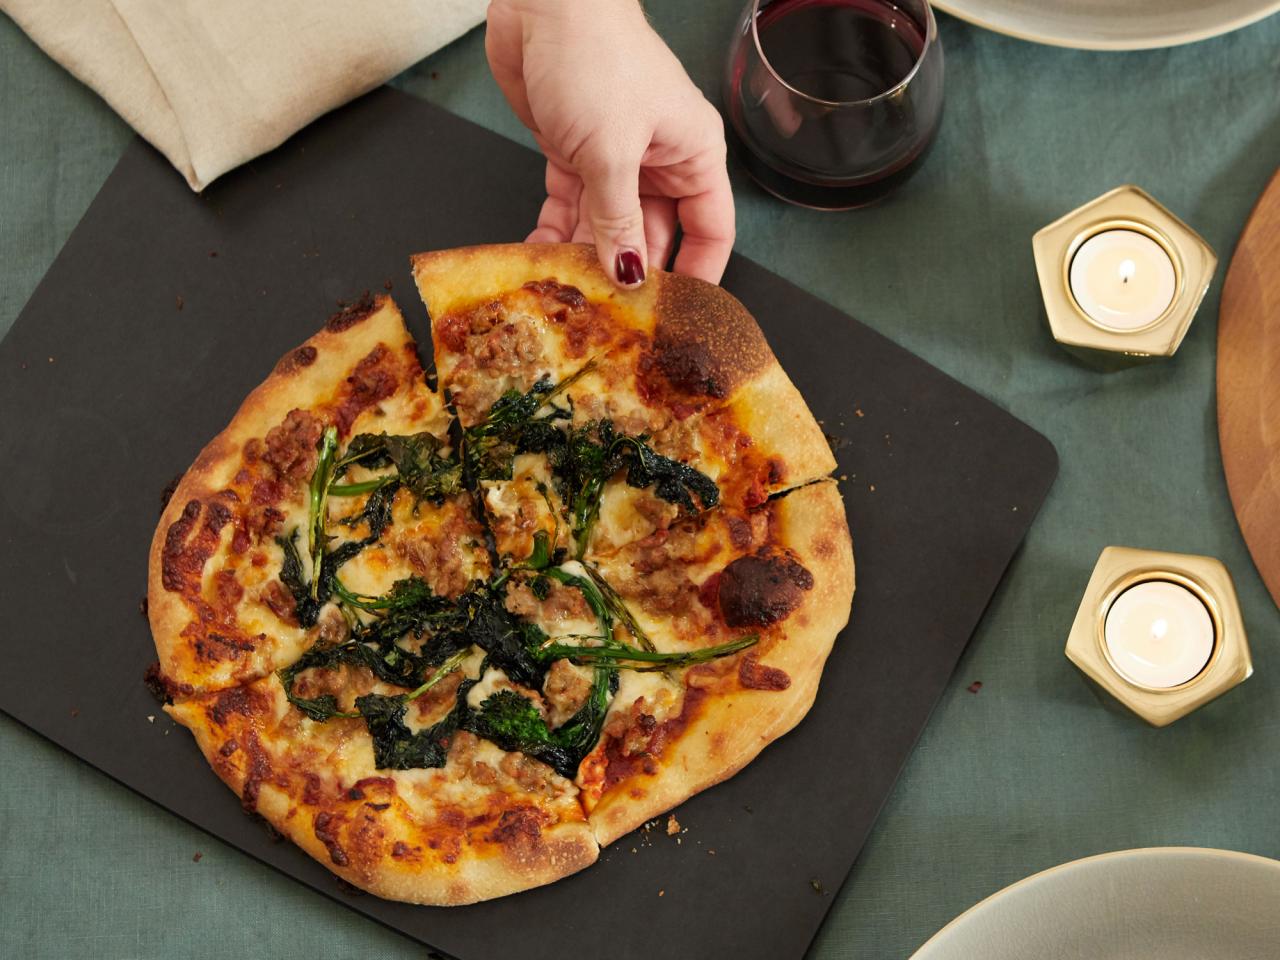 Making Pizza at Home: 5 Tips for a Great Result